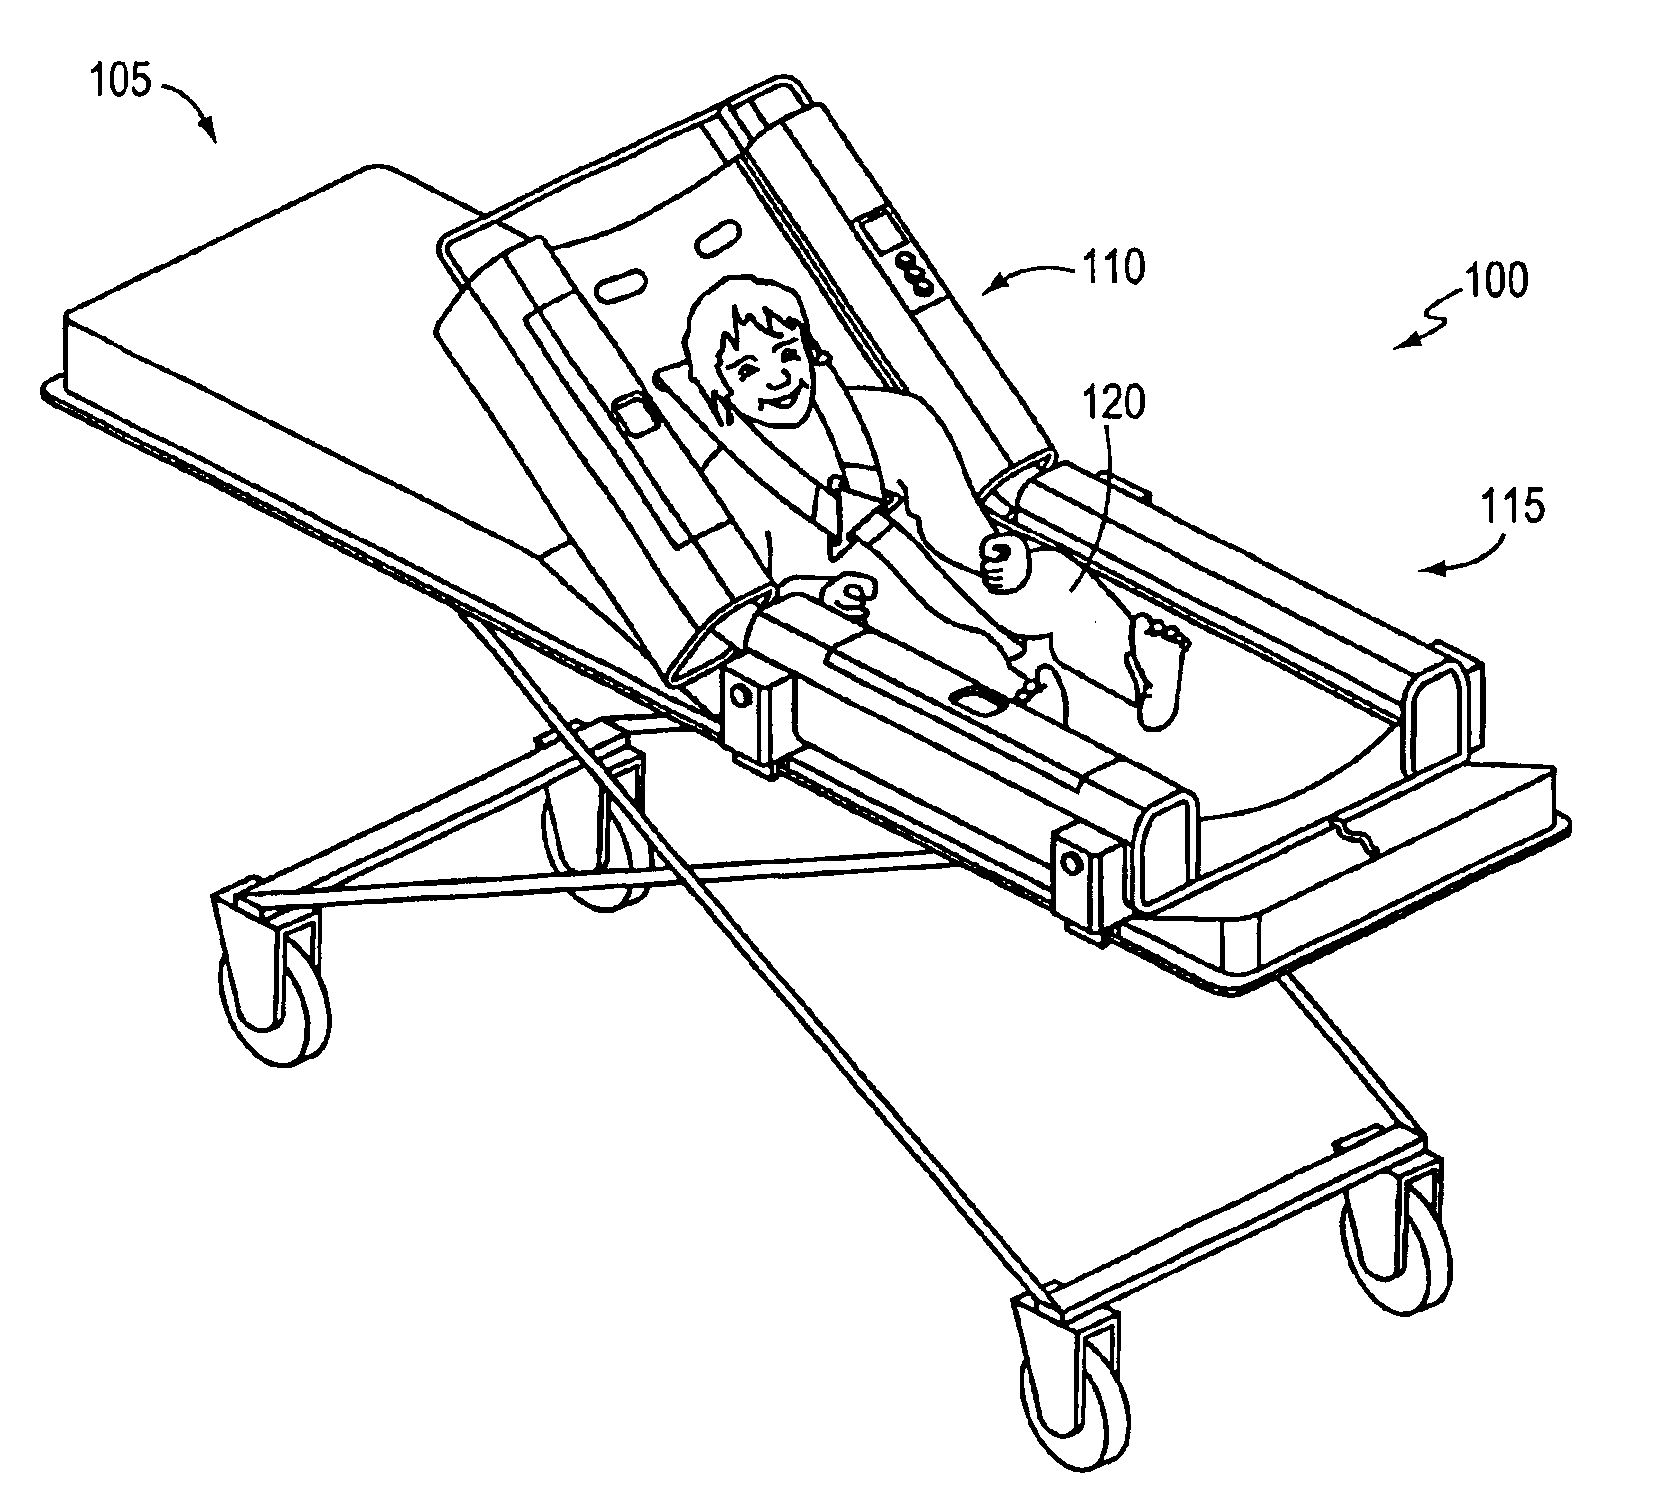 Device for emergency transport of pediatric patients